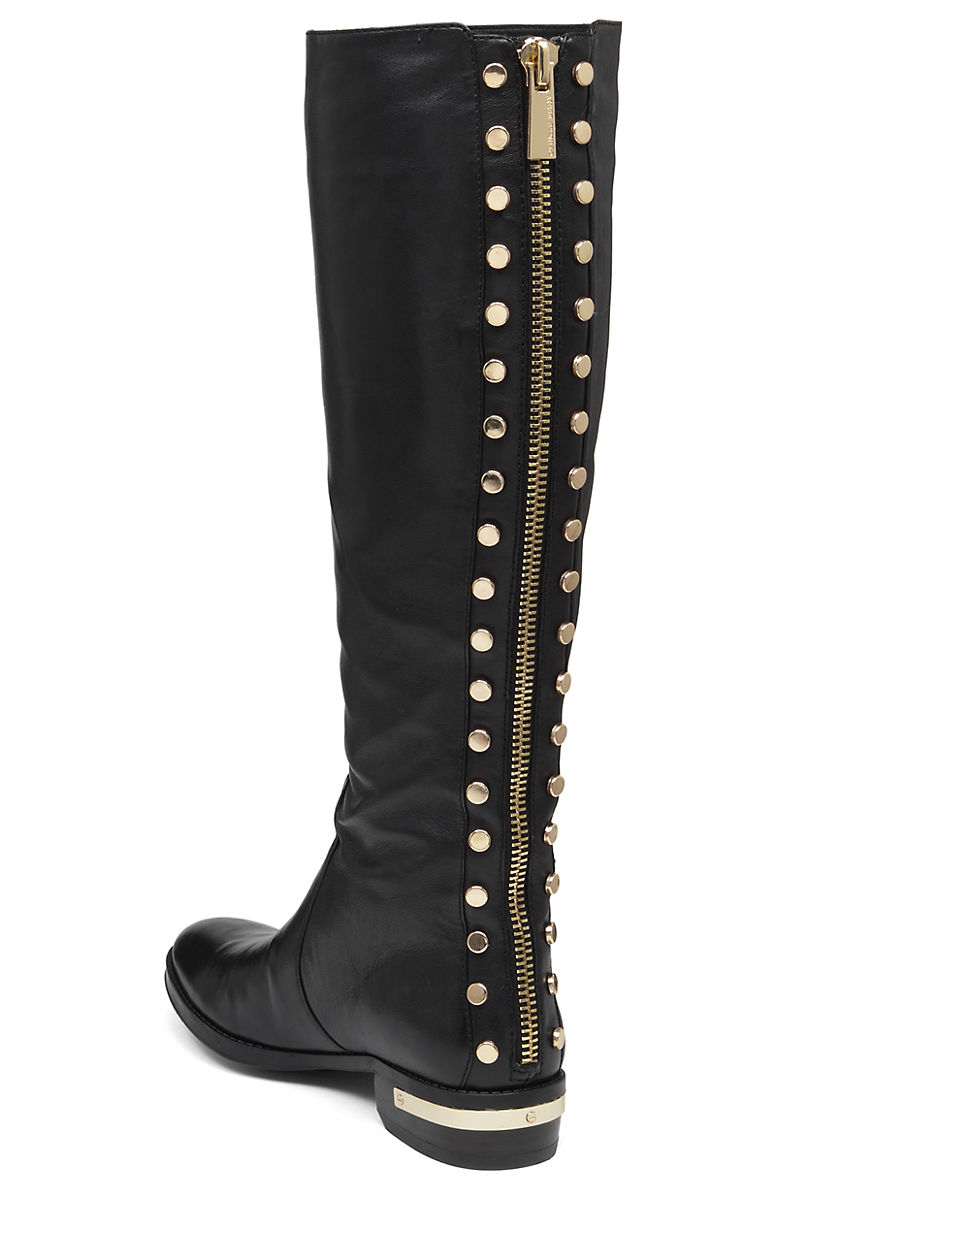 Lyst - Vince Camuto Parshell Leather Knee High Boots in Black